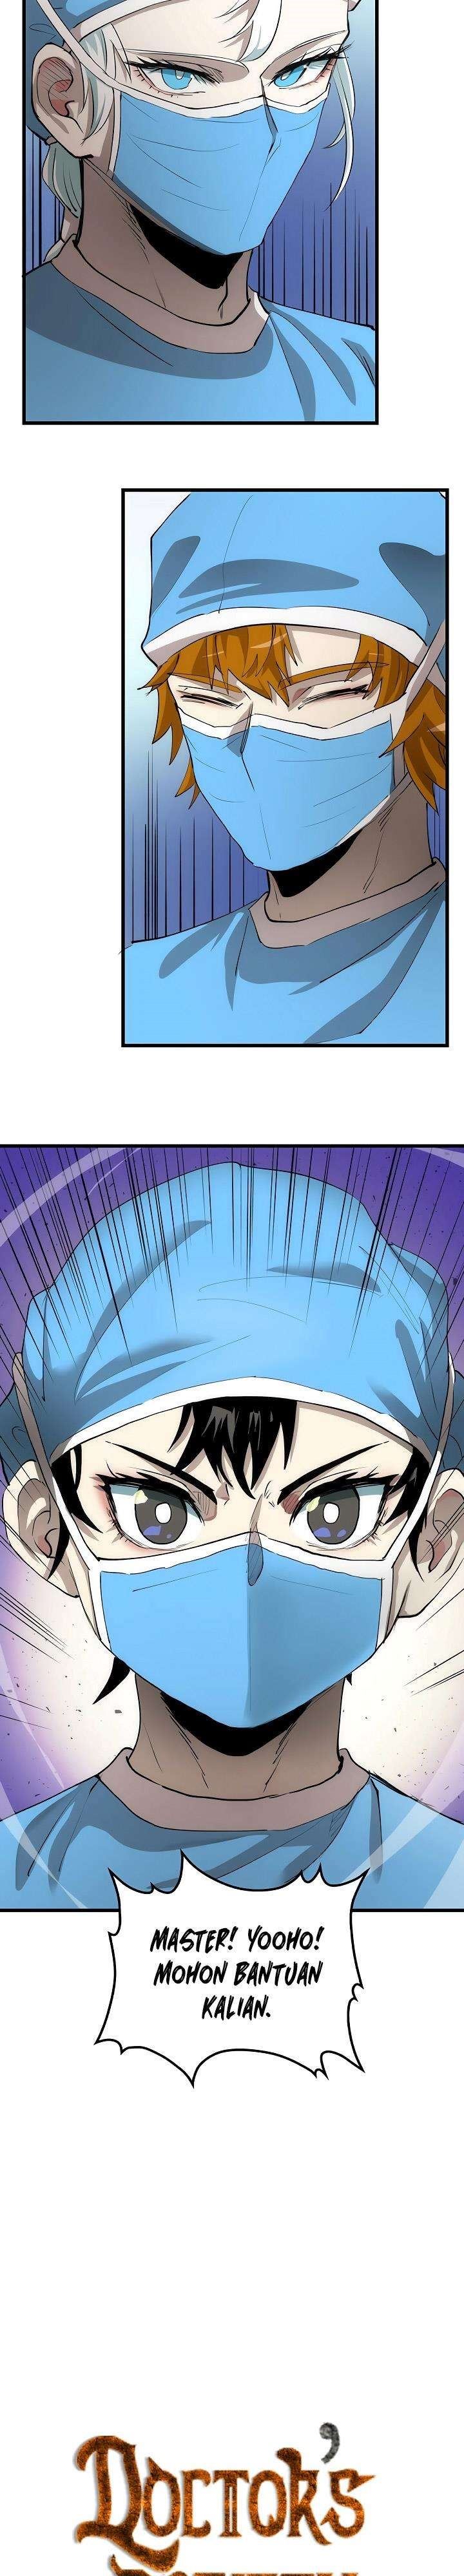 Doctor’s Rebirth Chapter 39